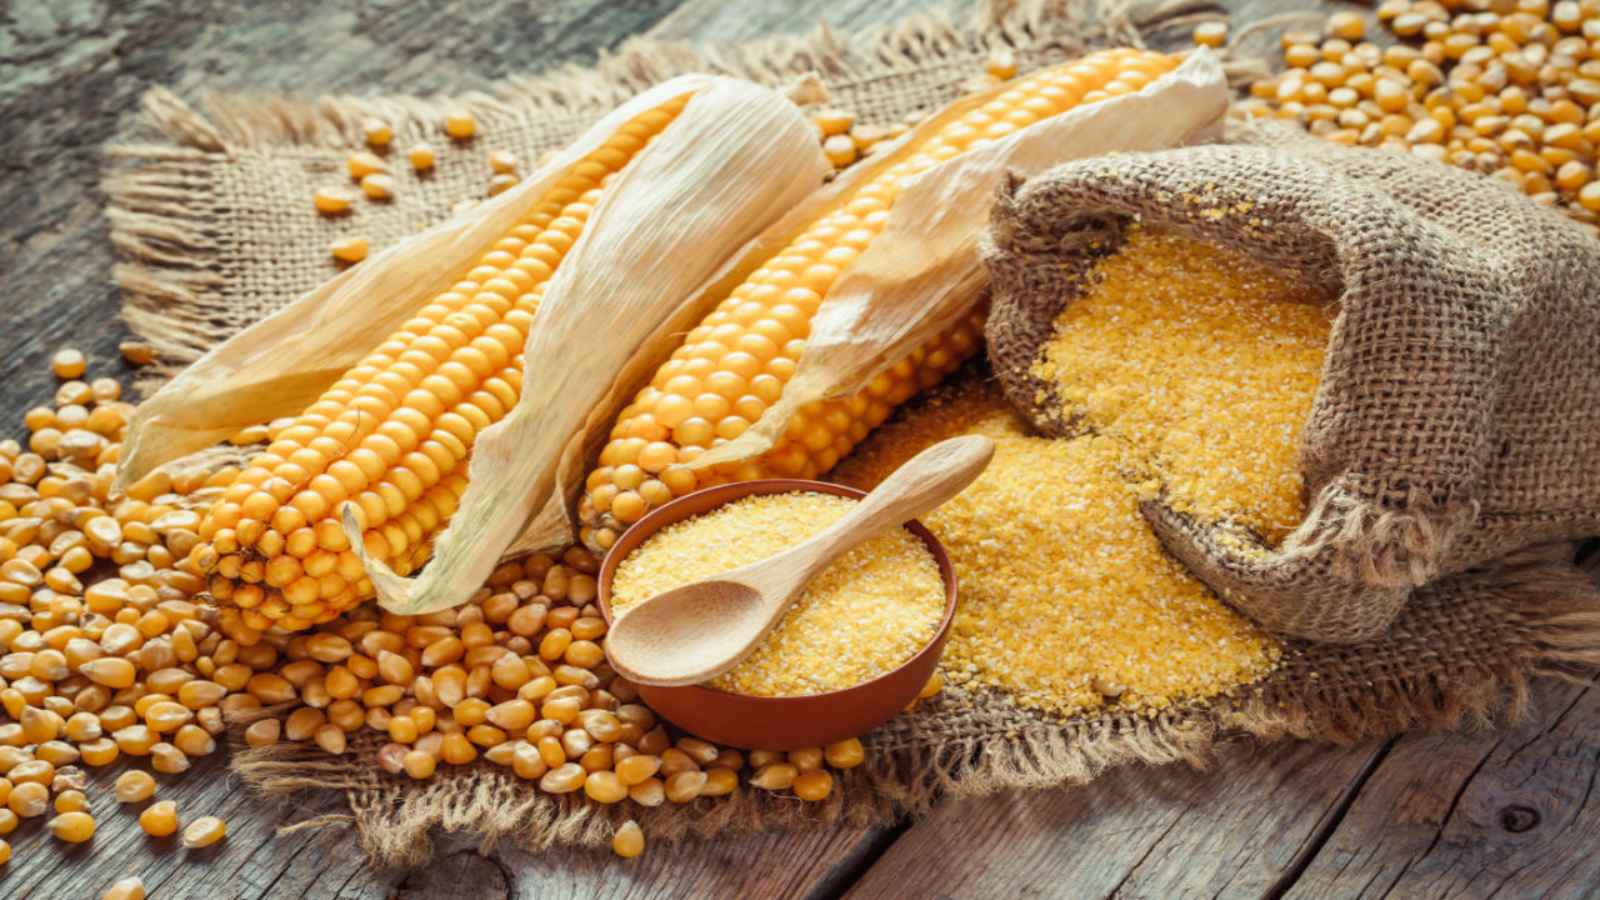 Maize Day 2022 (US): Date, History and Recipes